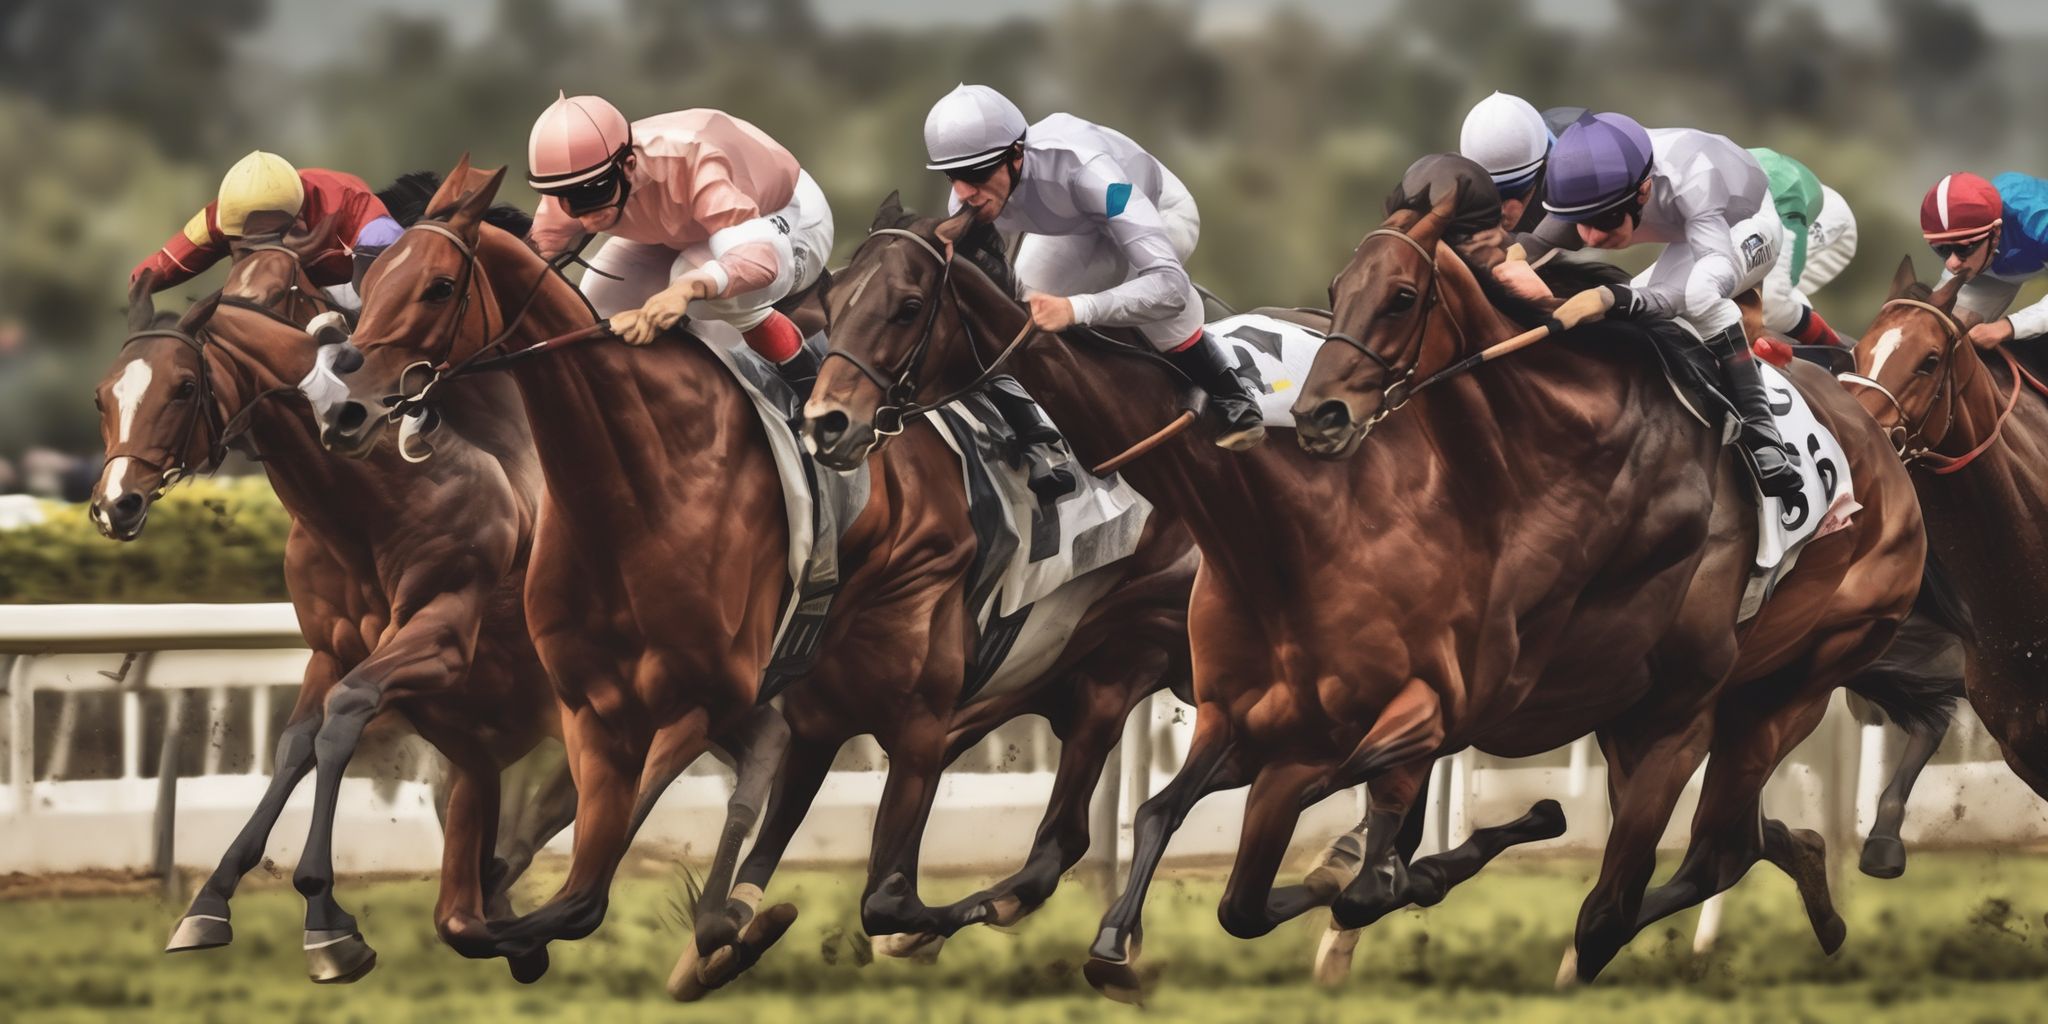 Horse racing  in realistic, photographic style